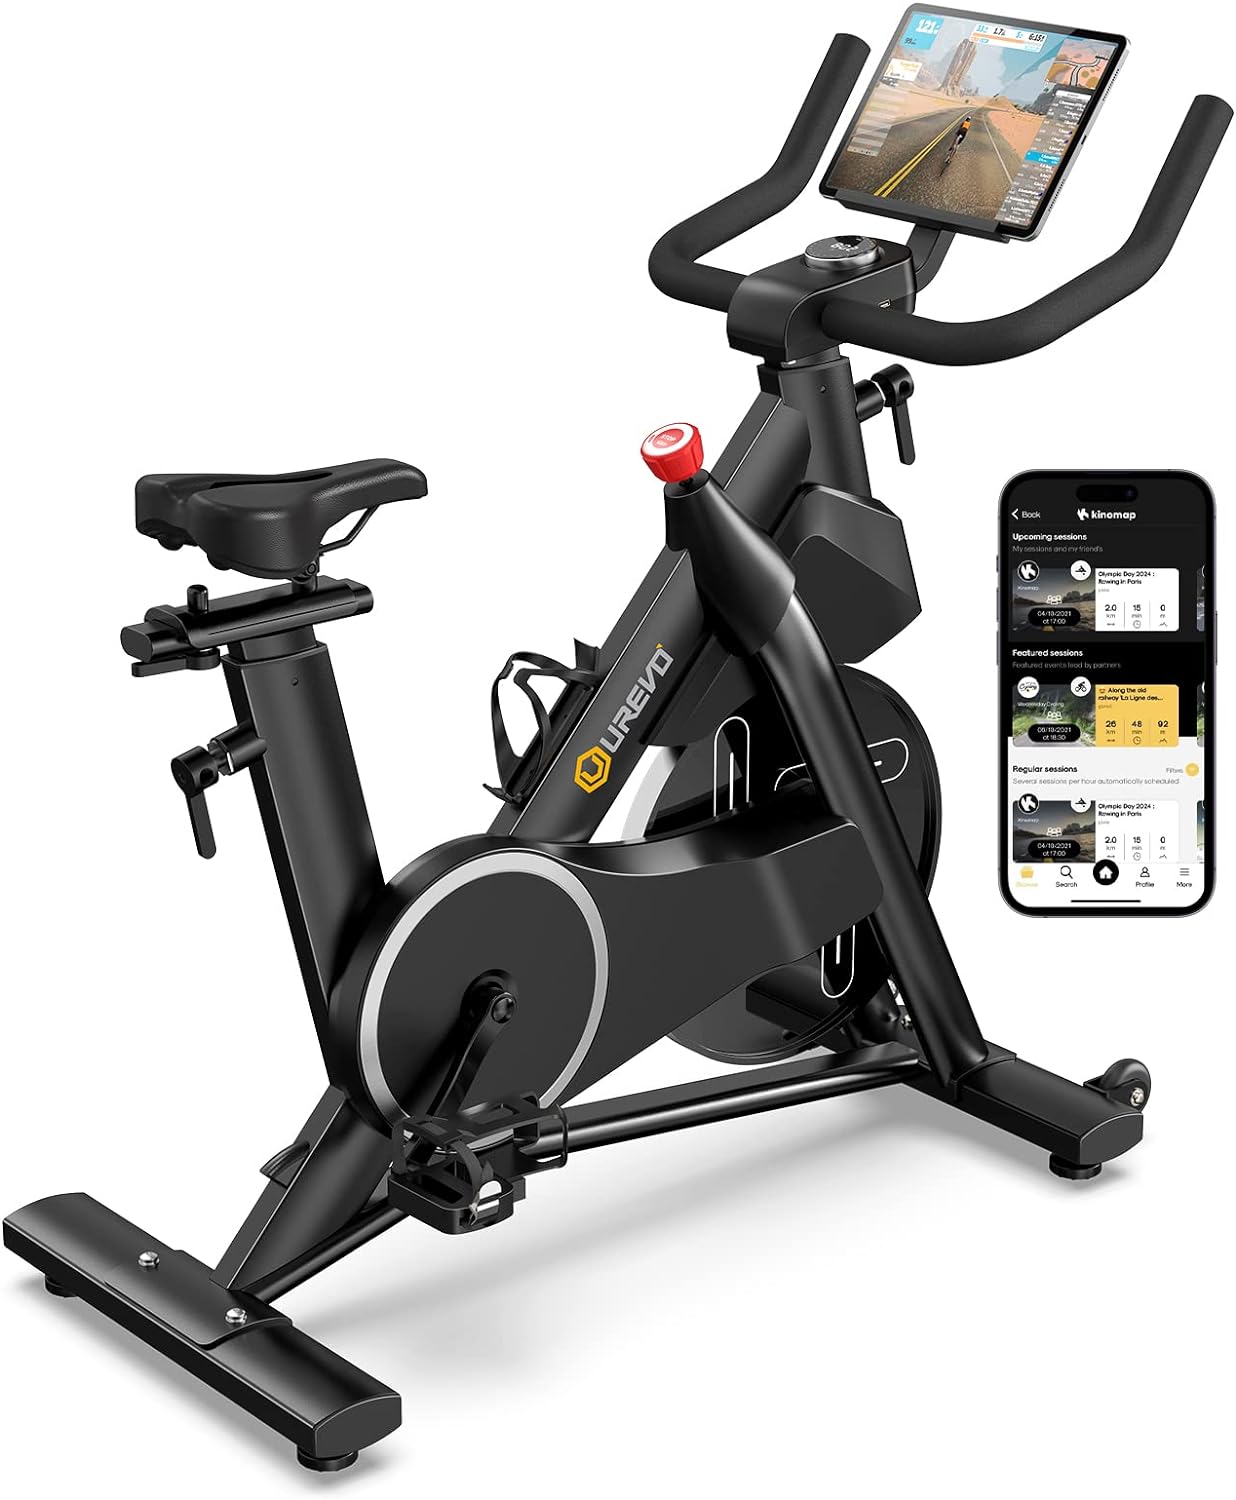 UREVO Auto-Motorized Magnetic Exercise Bike, Smart Indoor Cycling Bike Stationary for Home Compatible with APPs, 350LBS Weight Capacity, Tablet Holder, Competition seat, Silent Belt Drive…